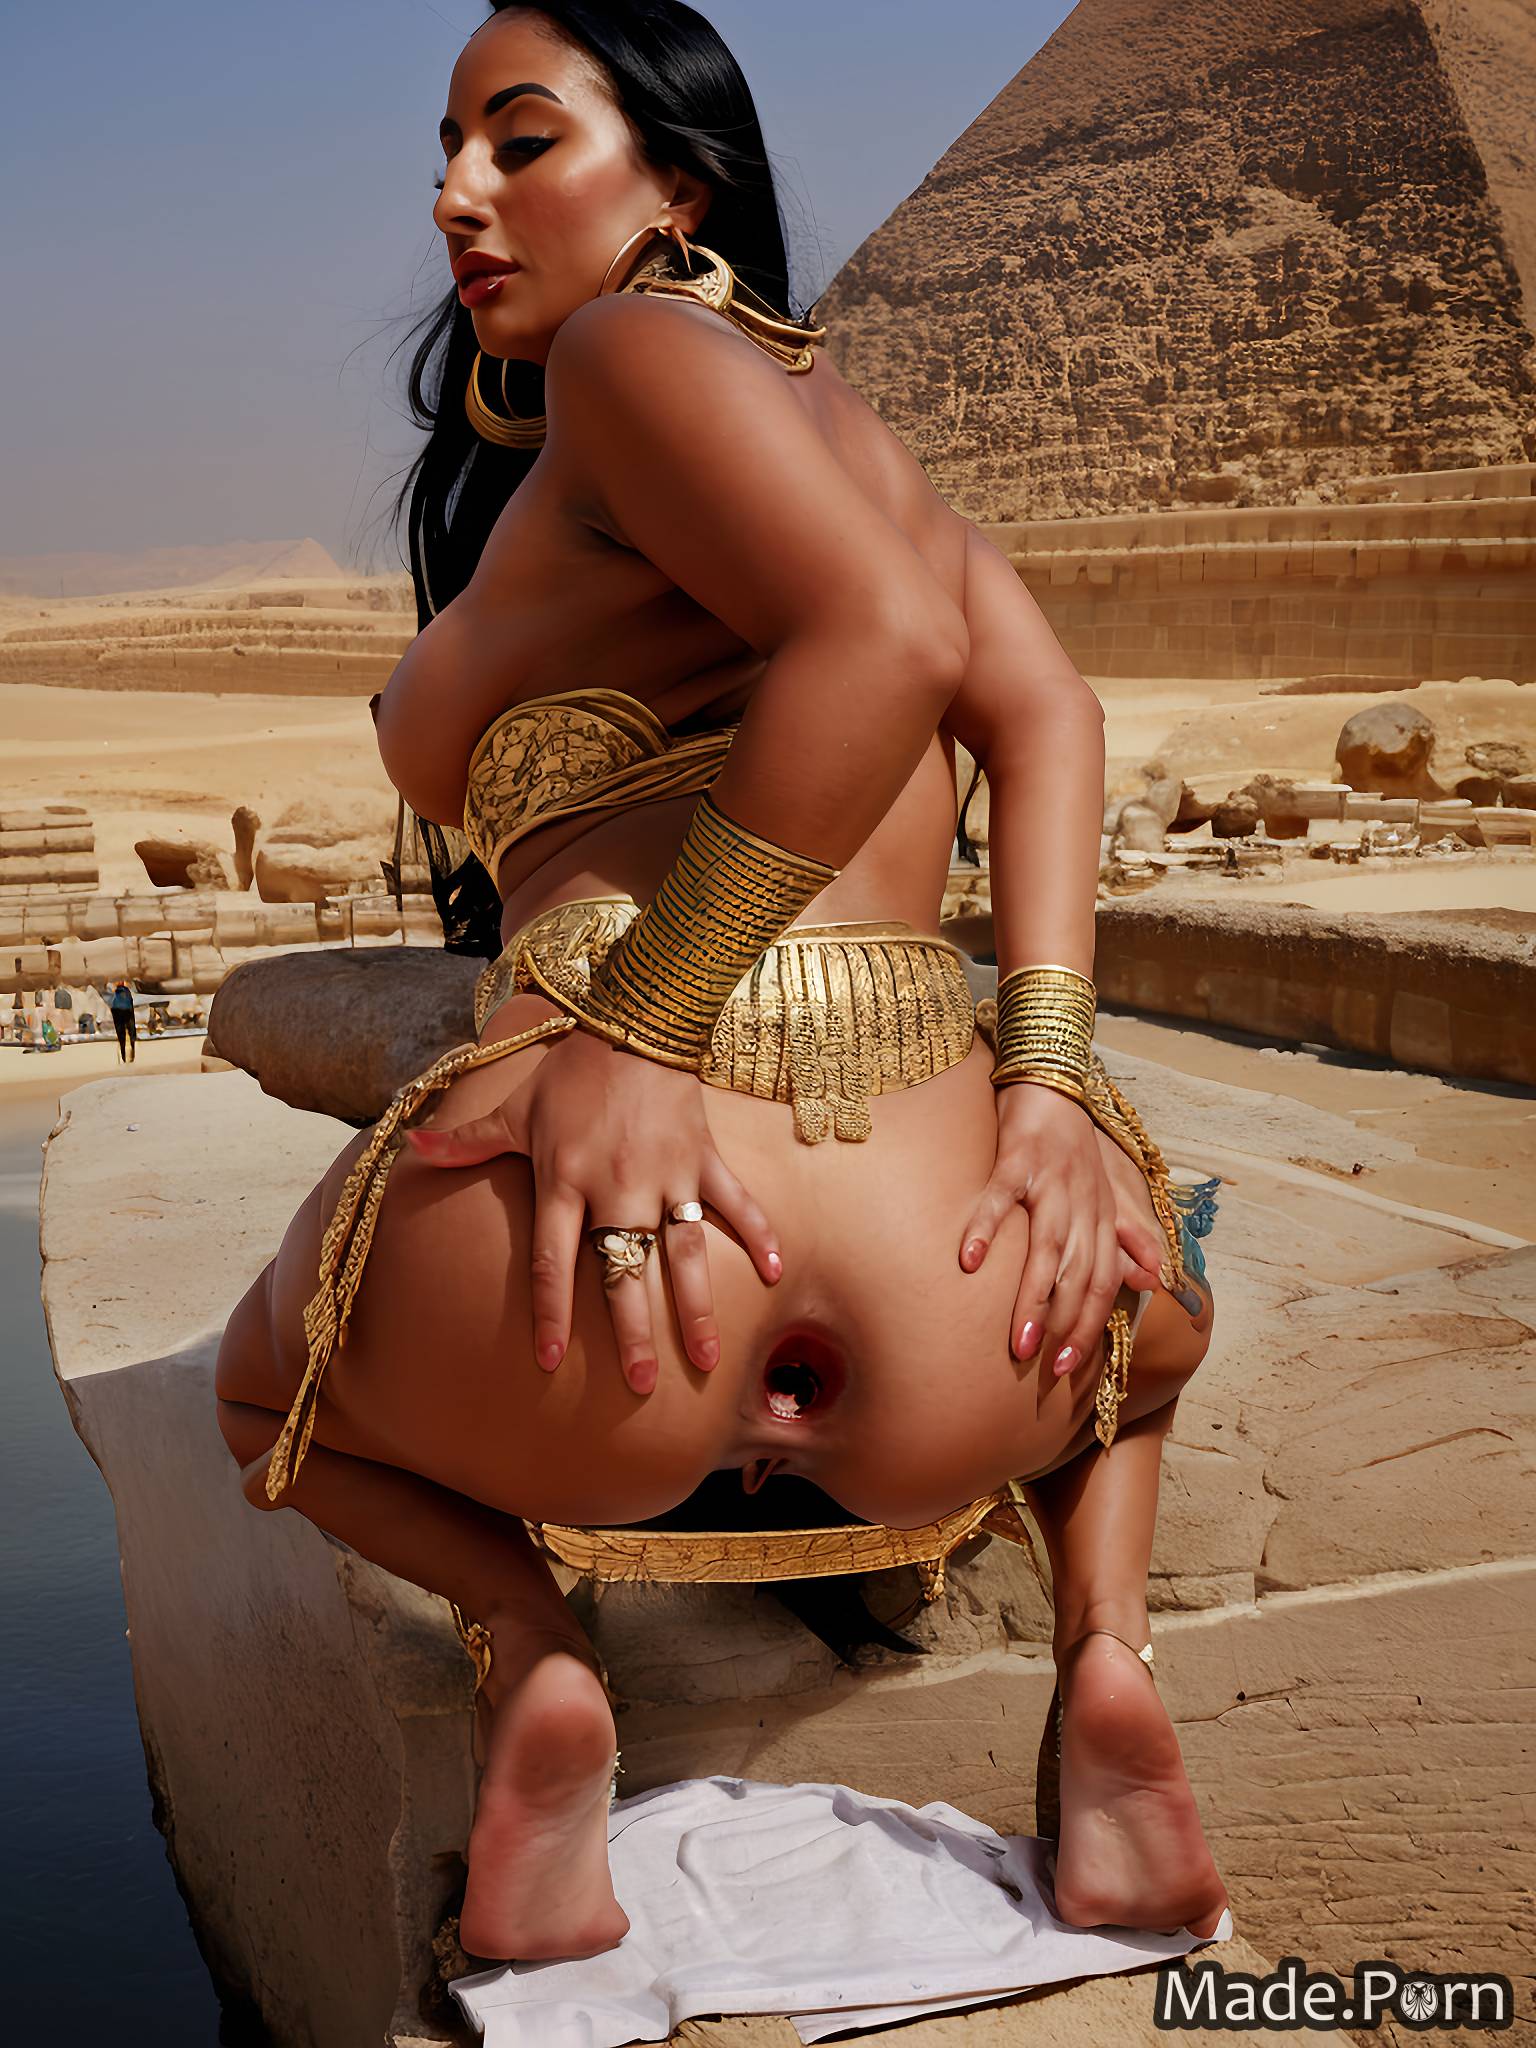 gigantic boobs gold spreading ass Pyramids of Giza, Egypt jewelry belly dancer silver